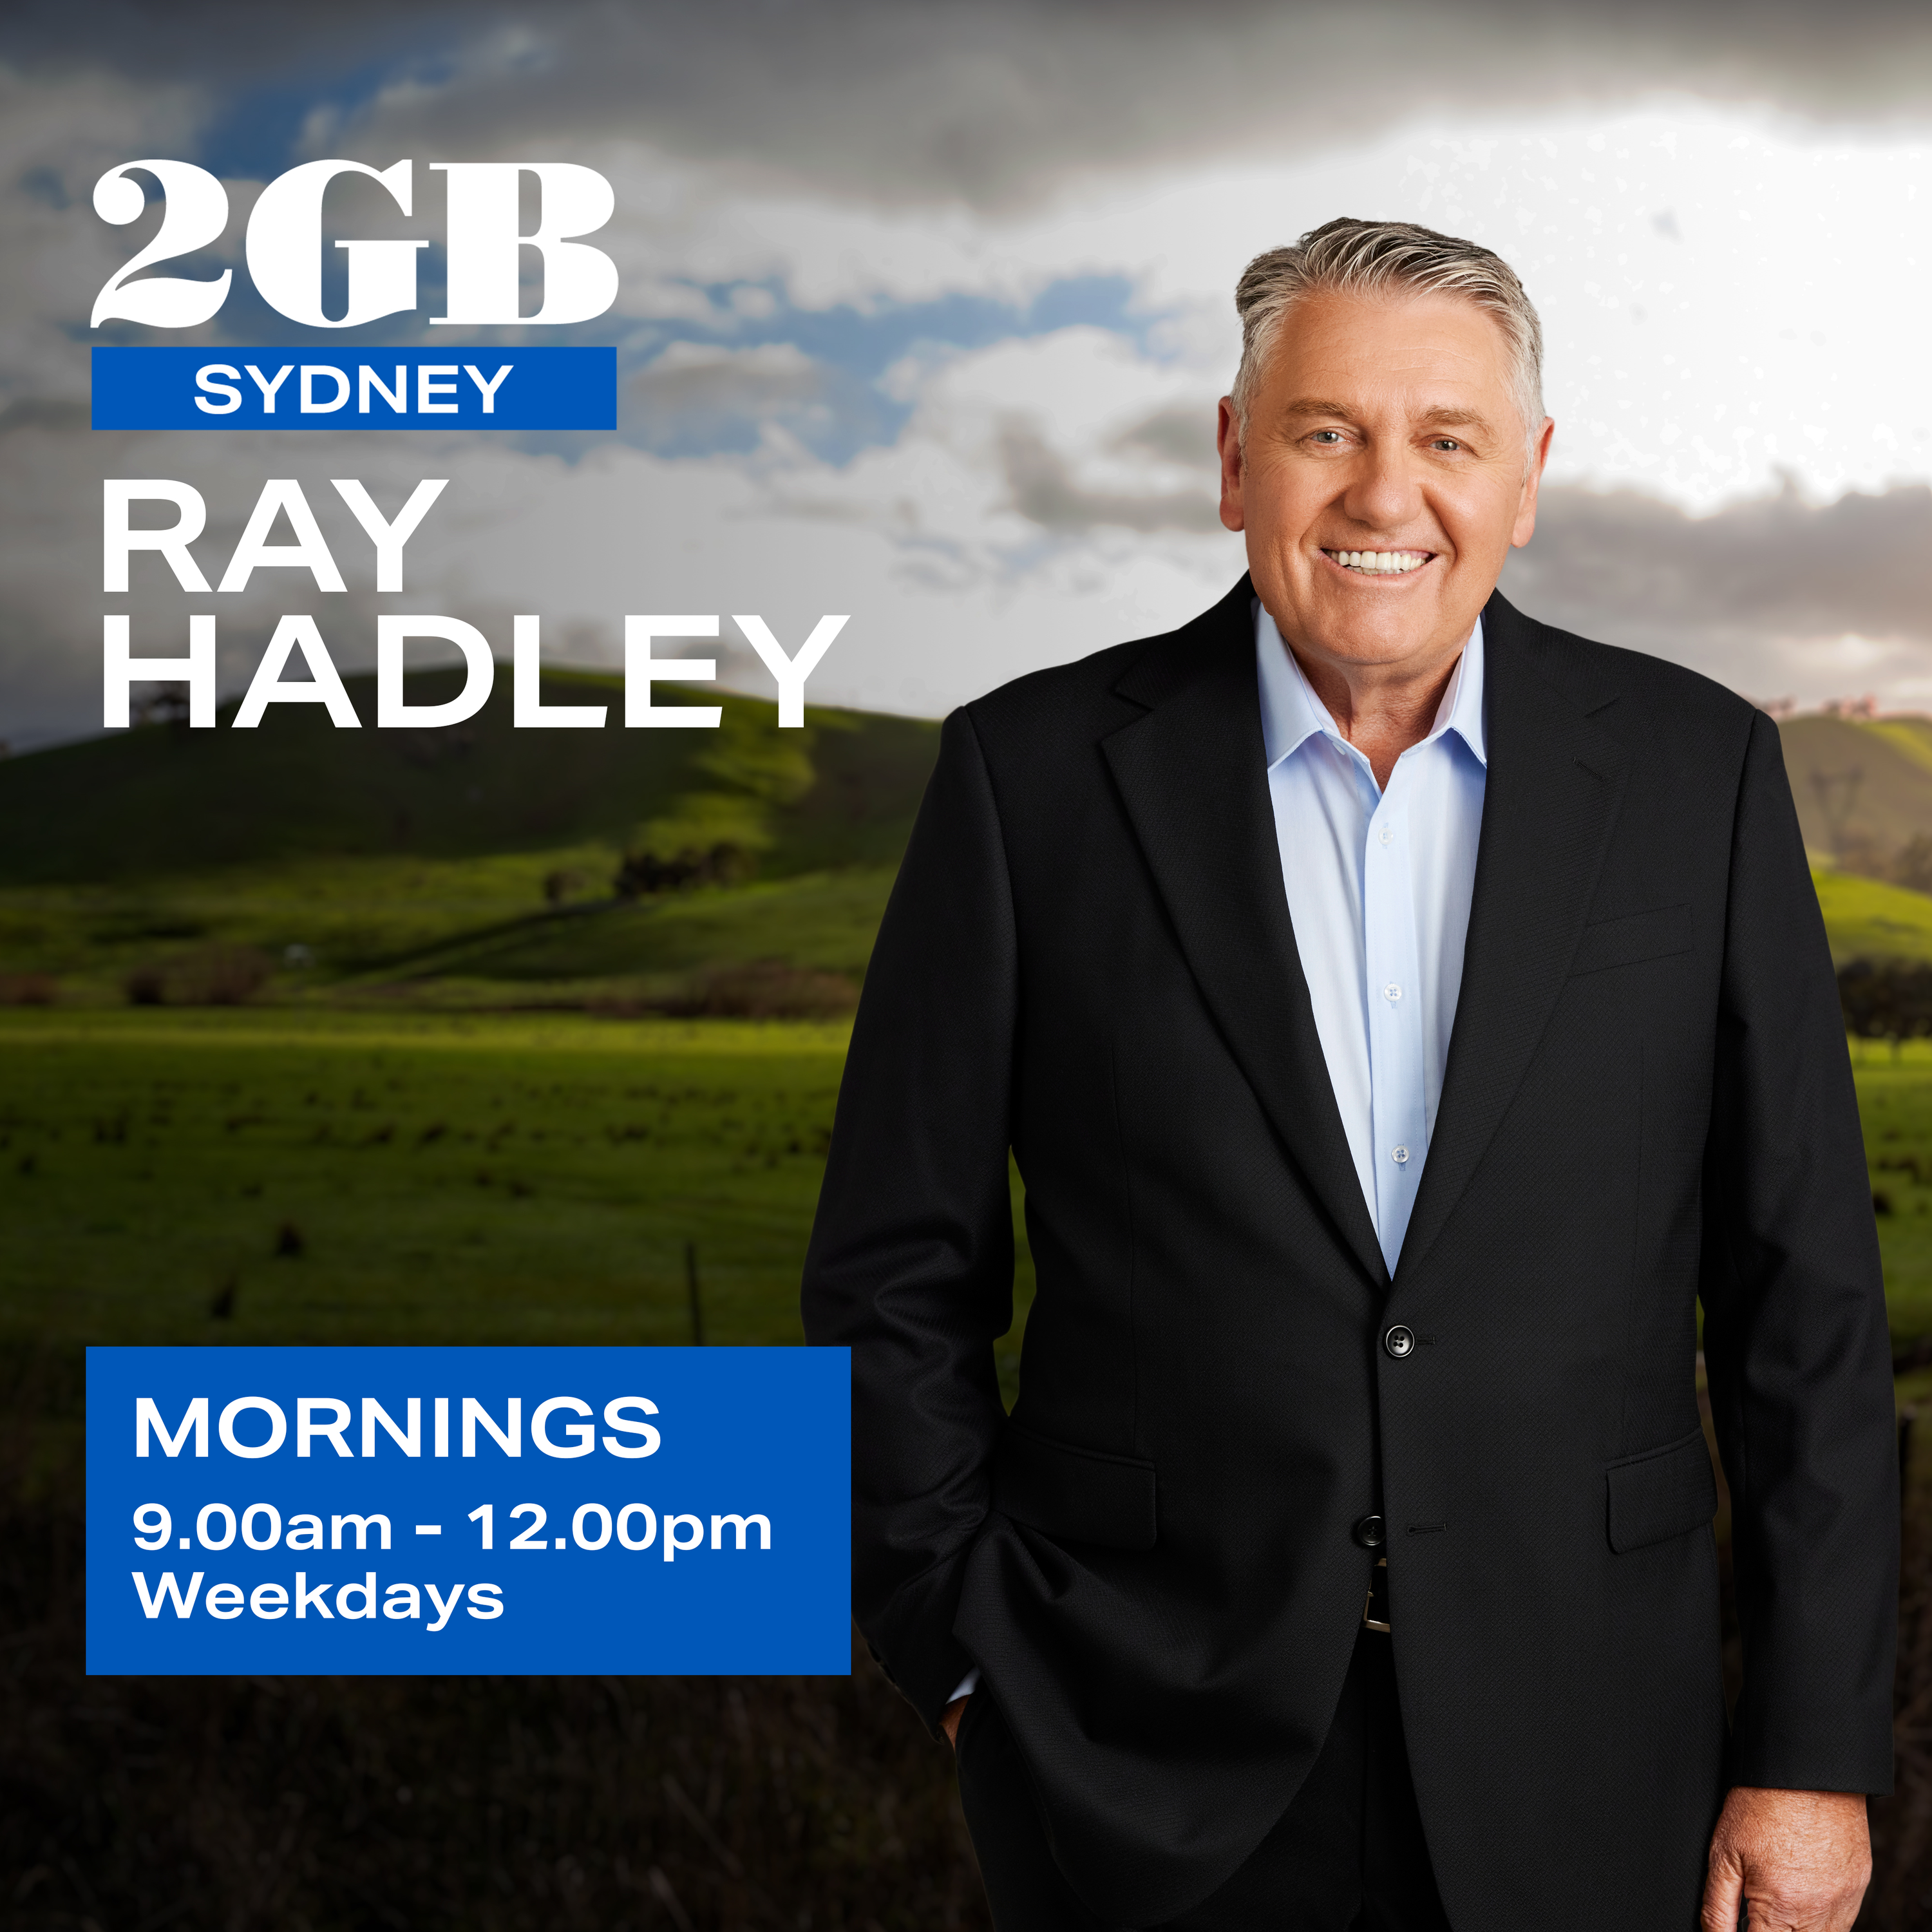 The Ray Hadley Morning Show with Mark Levy - Full Show, December 14th